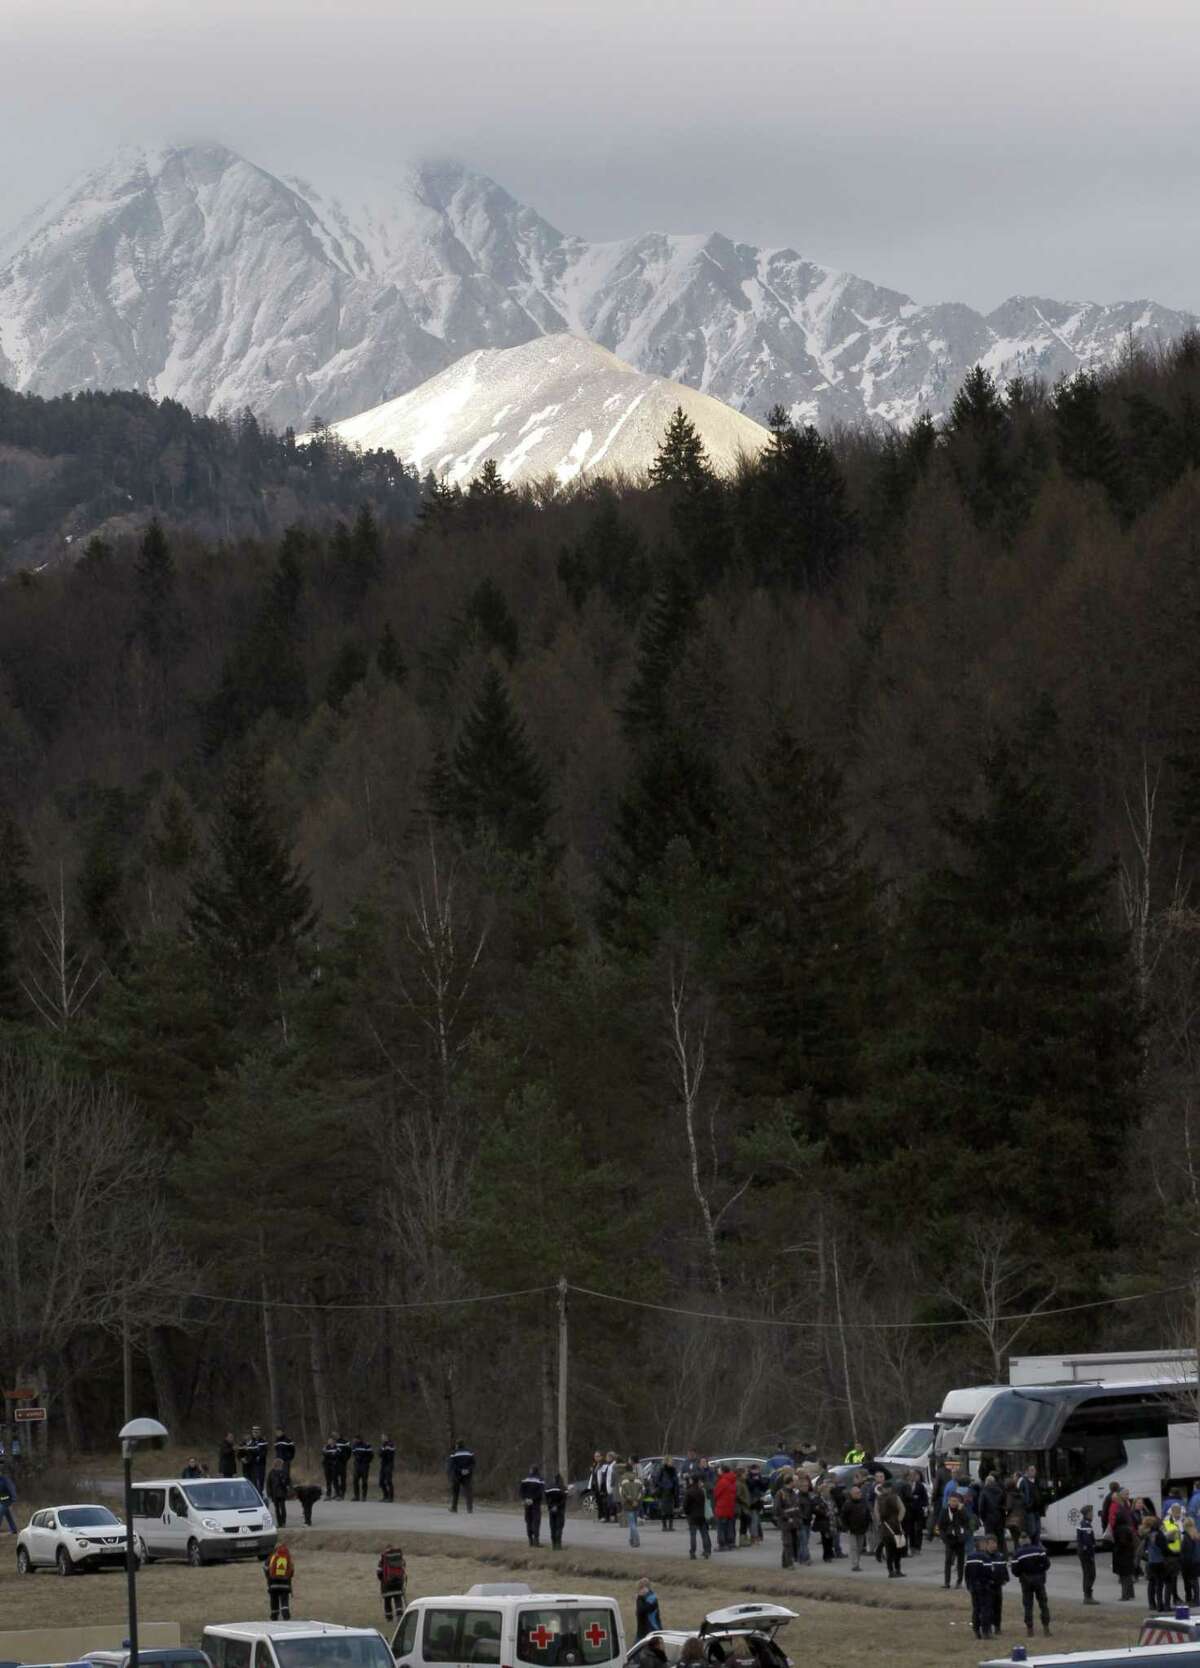 Family members of people involved in Germanwings jetliner that crashed on Tuesday in the French Alps arrive for a gathering in Le Vernet, France Thursday, March 26, 2015. The co-pilot of the Germanwings jet barricaded himself in the cockpit and ìintentionallyî rammed the plane full speed into the French Alps, ignoring the captainís frantic pounding on the cockpit door and the screams of terror from passengers, a prosecutor said Thursday. In a split second, he killed all 150 people aboard the plane. (AP Photo/Christophe Ena)